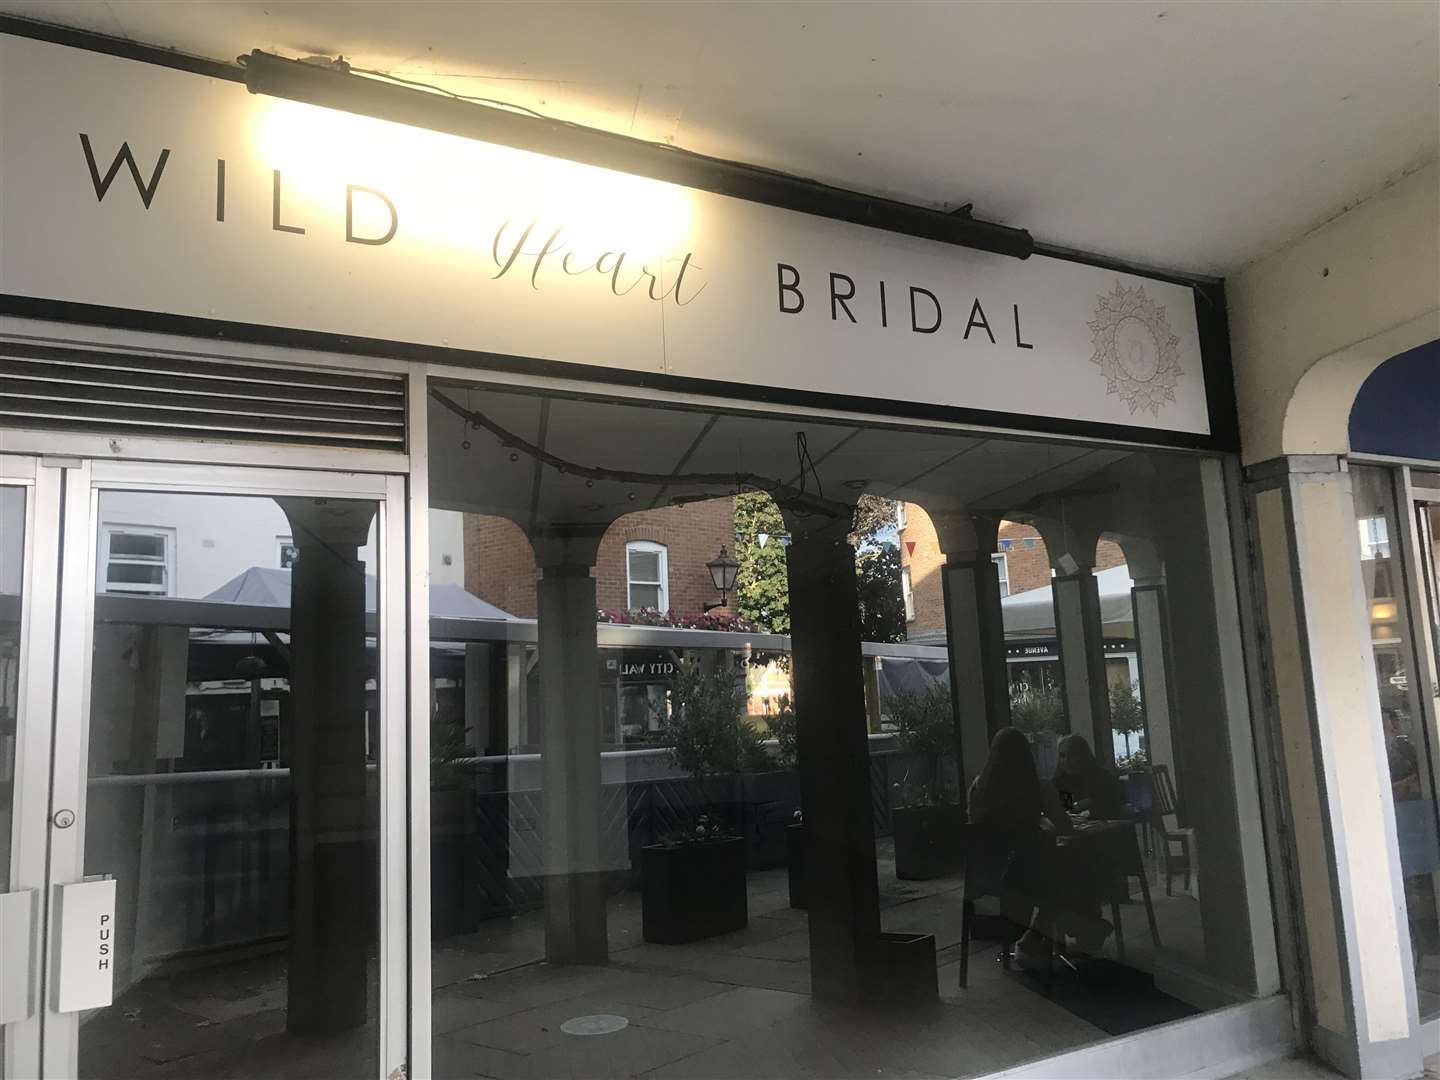 The former Wild at Heart bridal shop